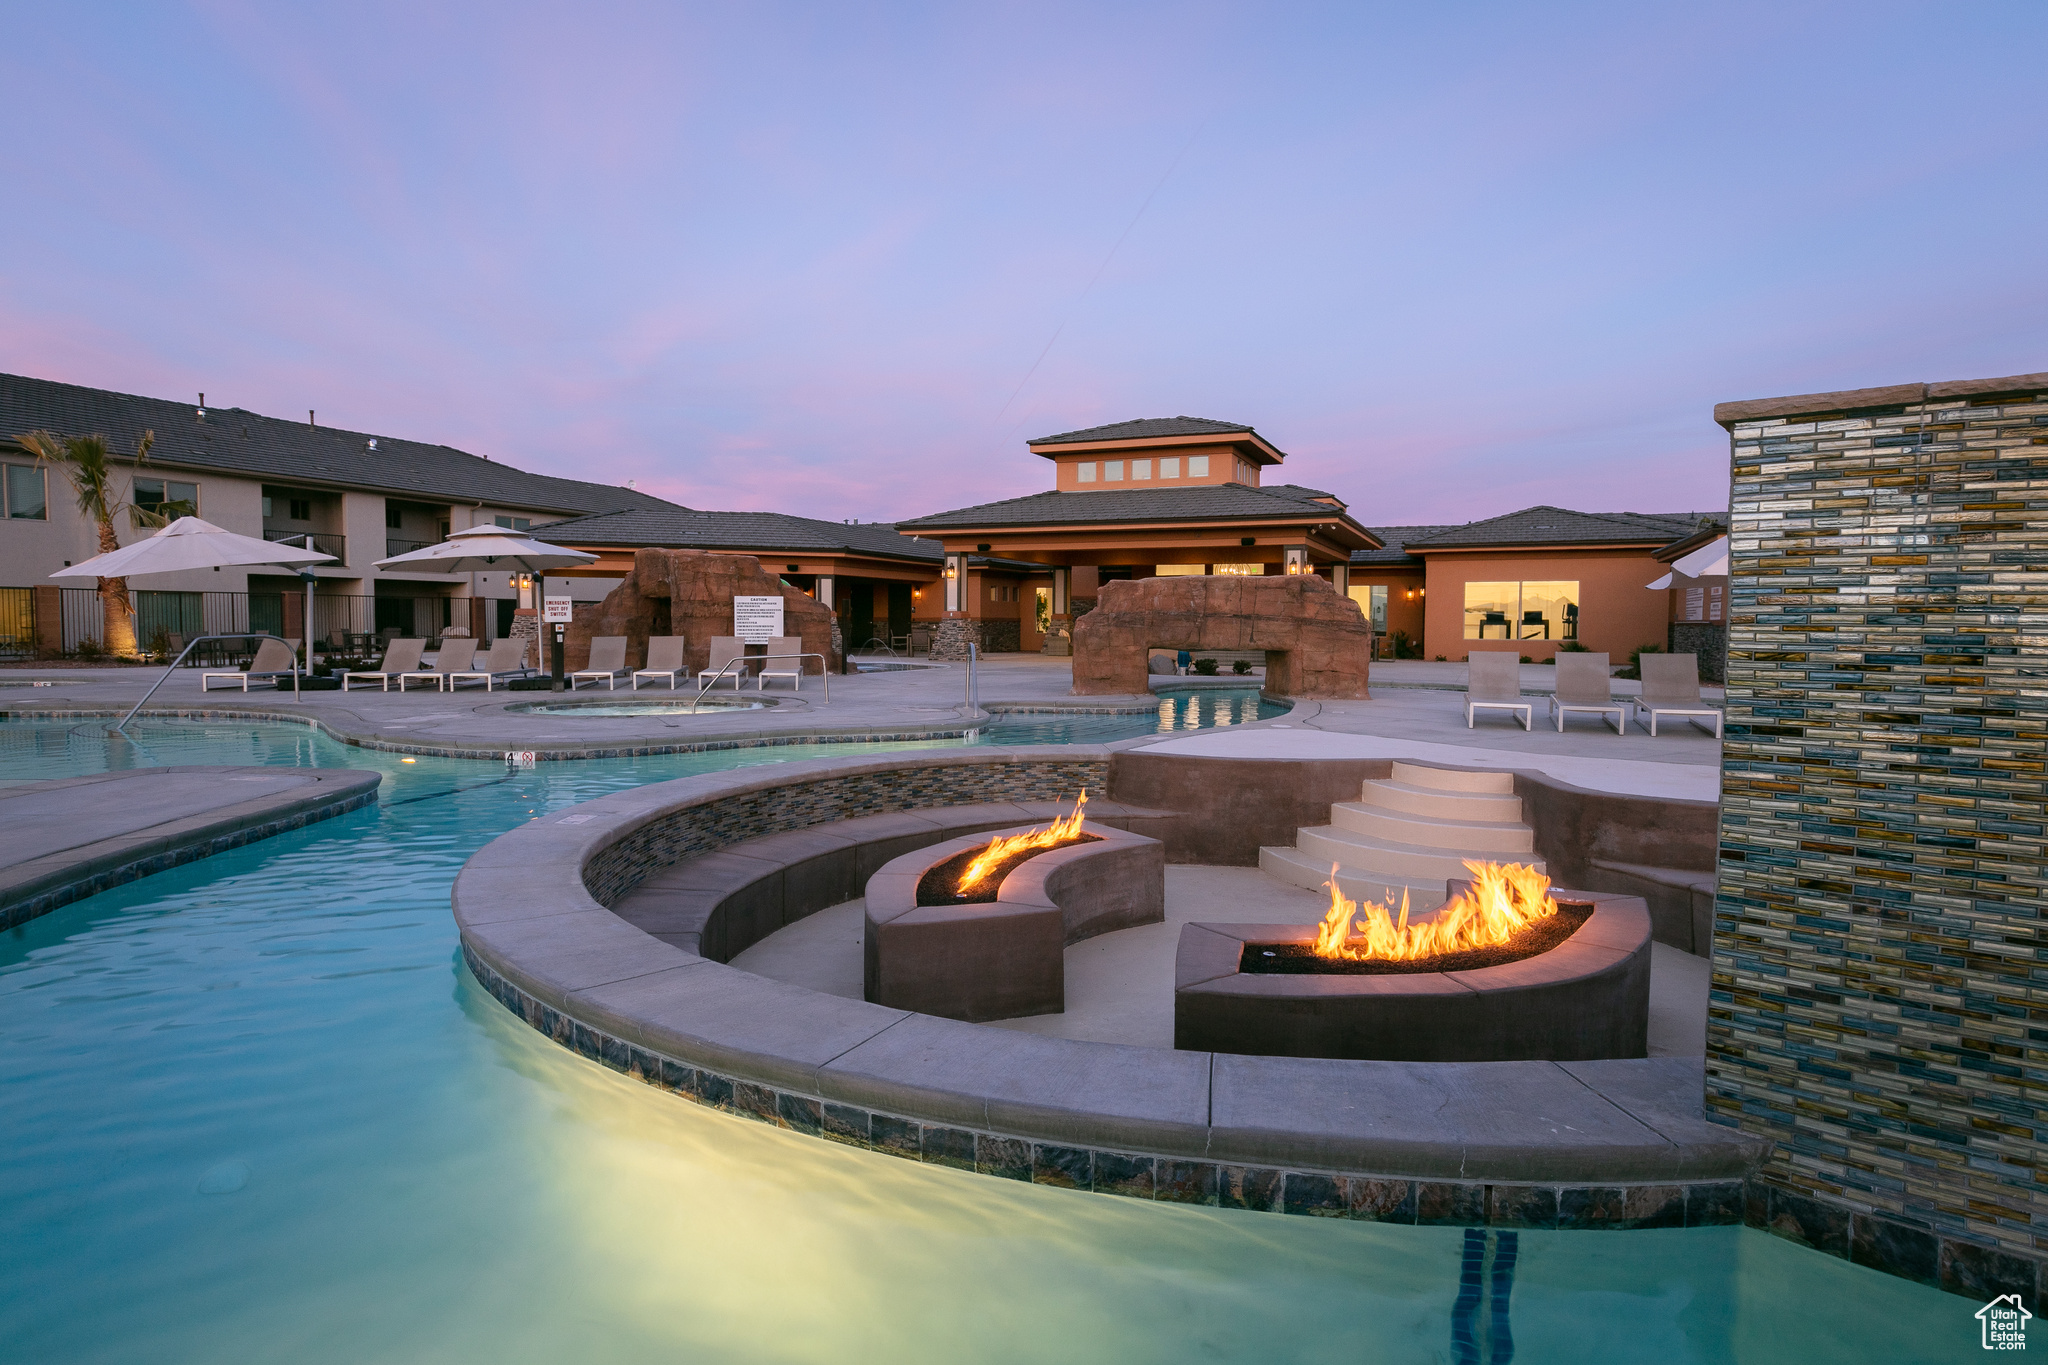 Pool at dusk with an outdoor fire pit and a patio